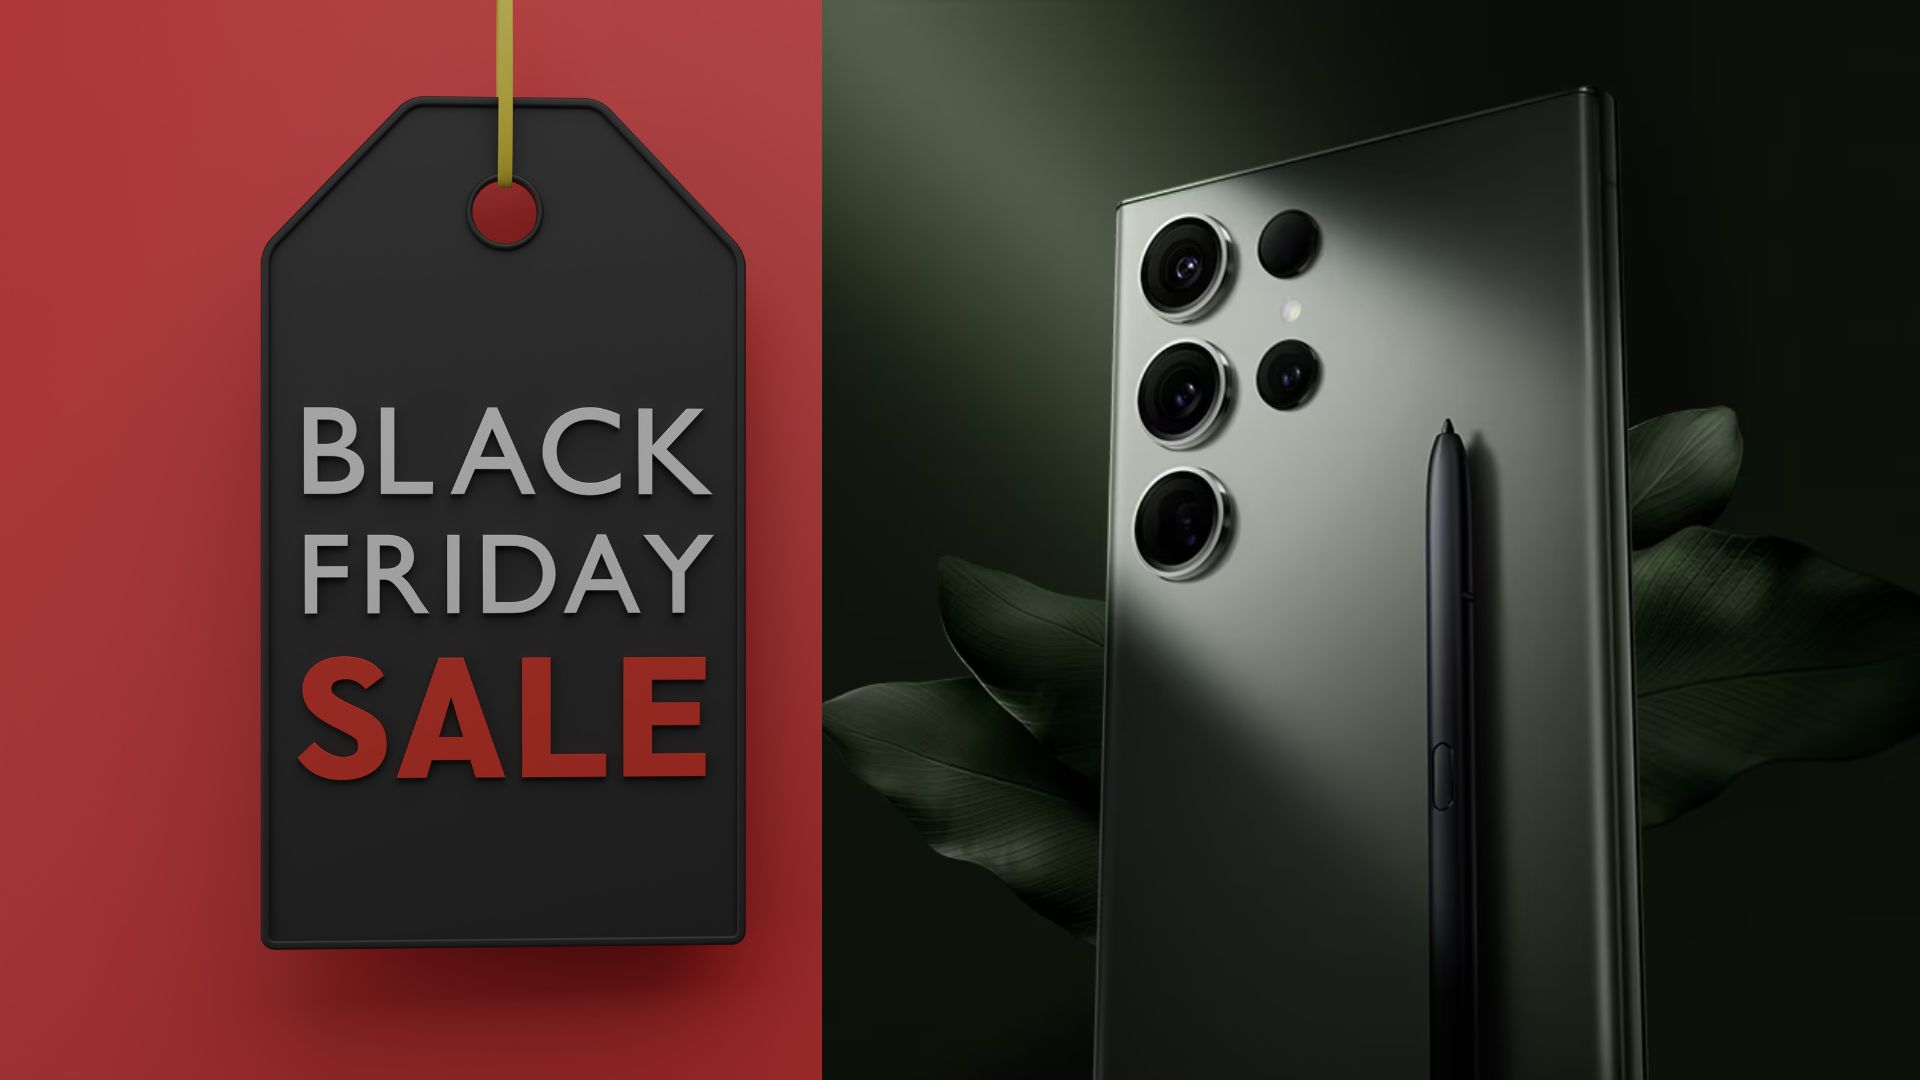 Black Friday Samsung US offers exclusive discounts on foldables, the S23 Ultra and more